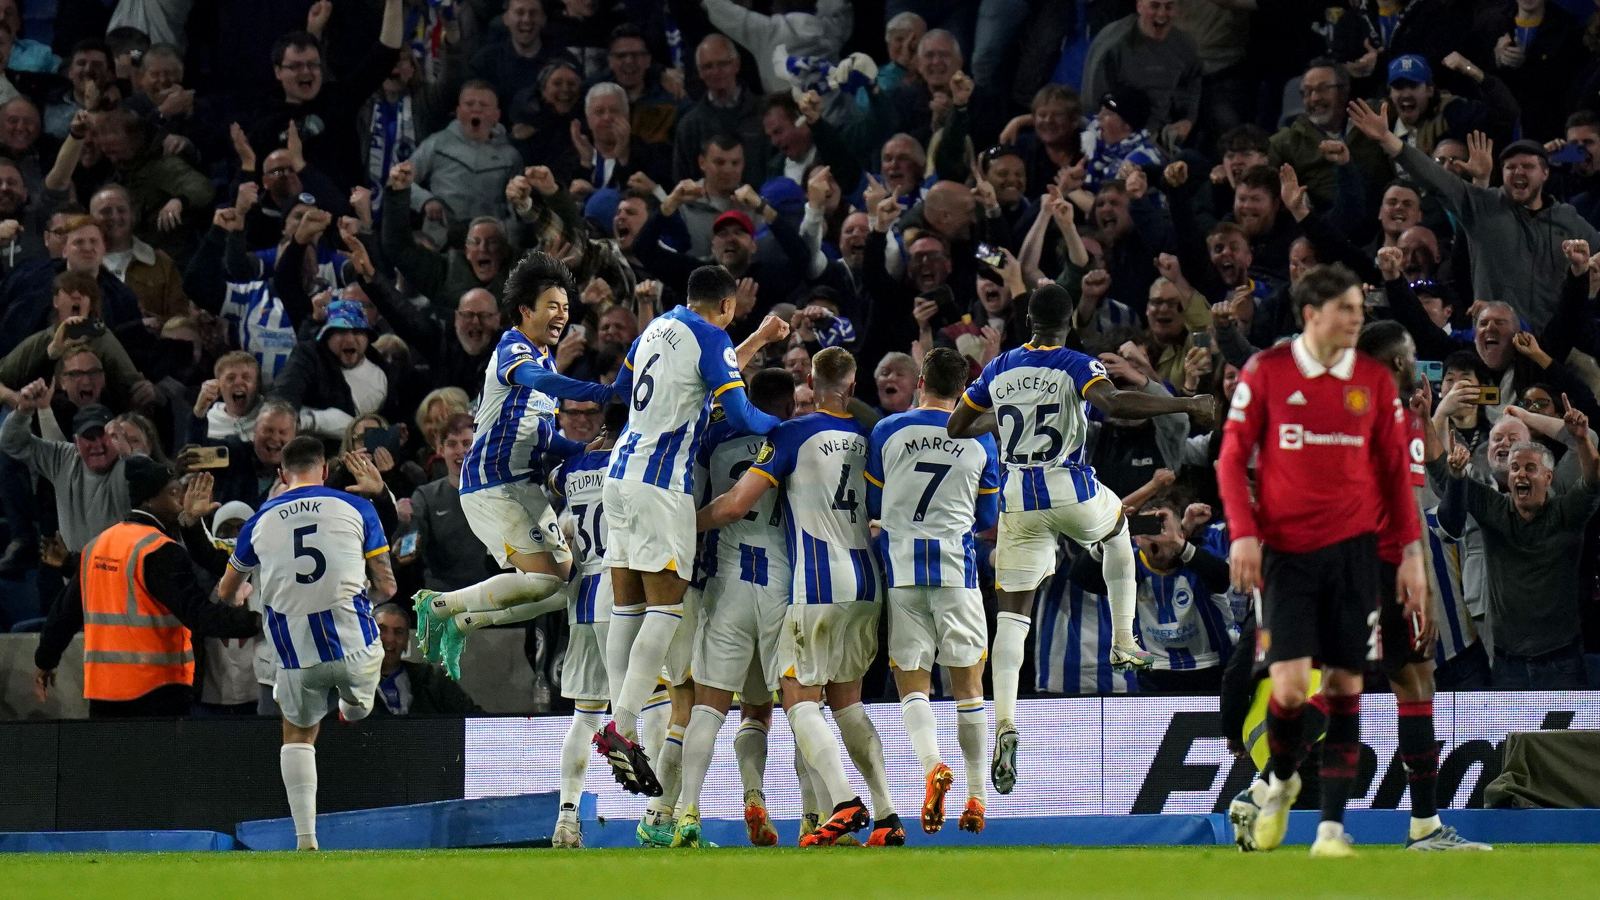 Mac Allister scores 99th-minute penalty to give Albion some redemption at Wembley